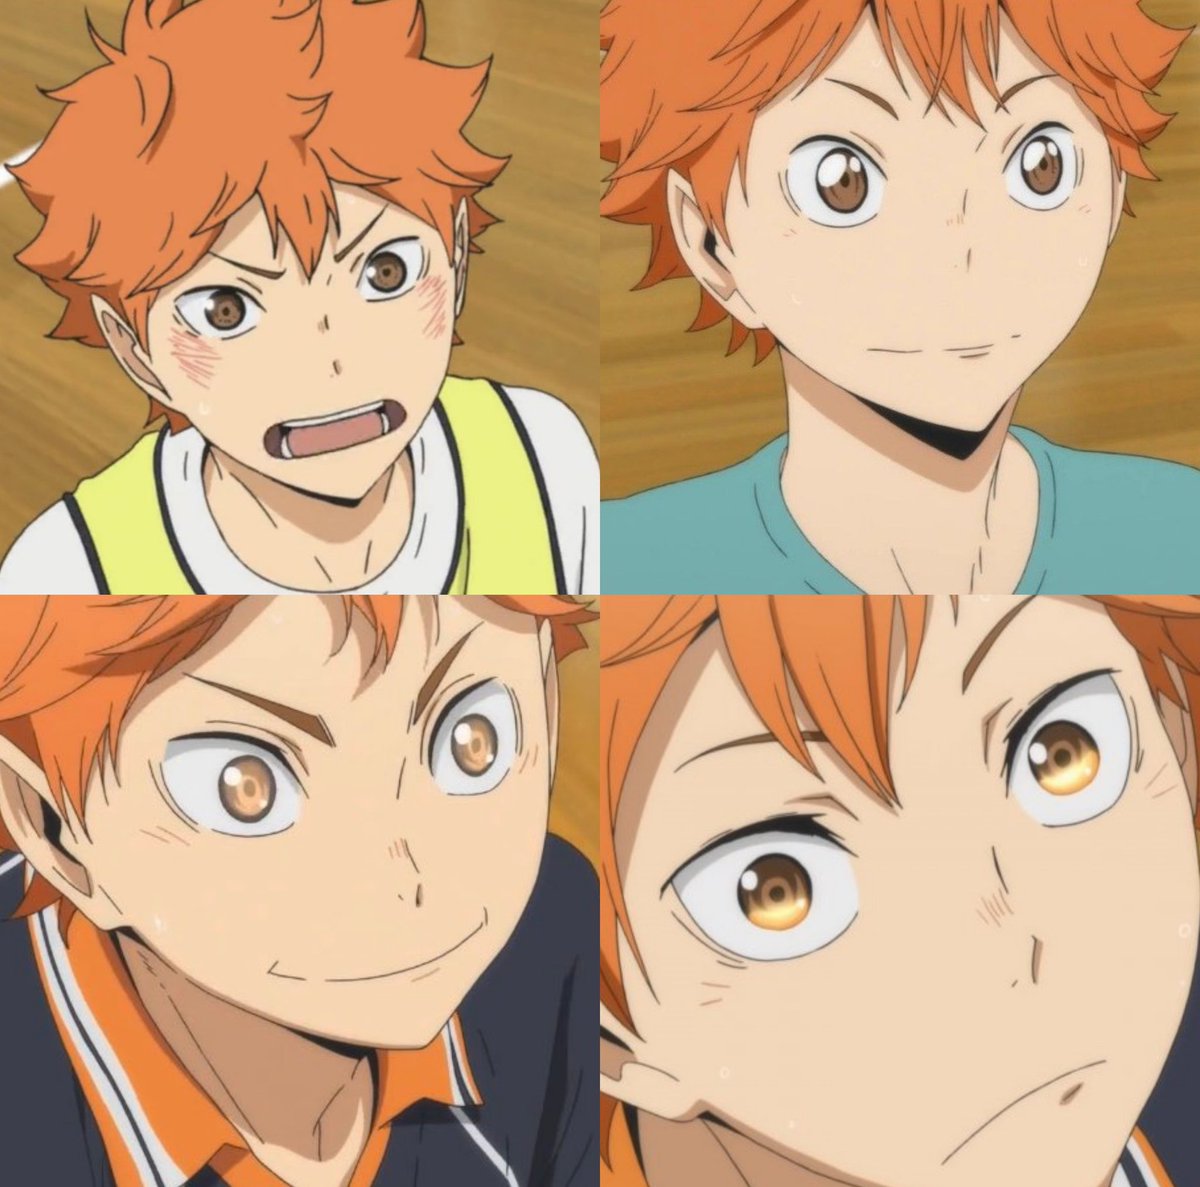 they've got a certain expression when one of them does or says something amazing. kageyama with a proud's grin and hinata with sparkle eyes.